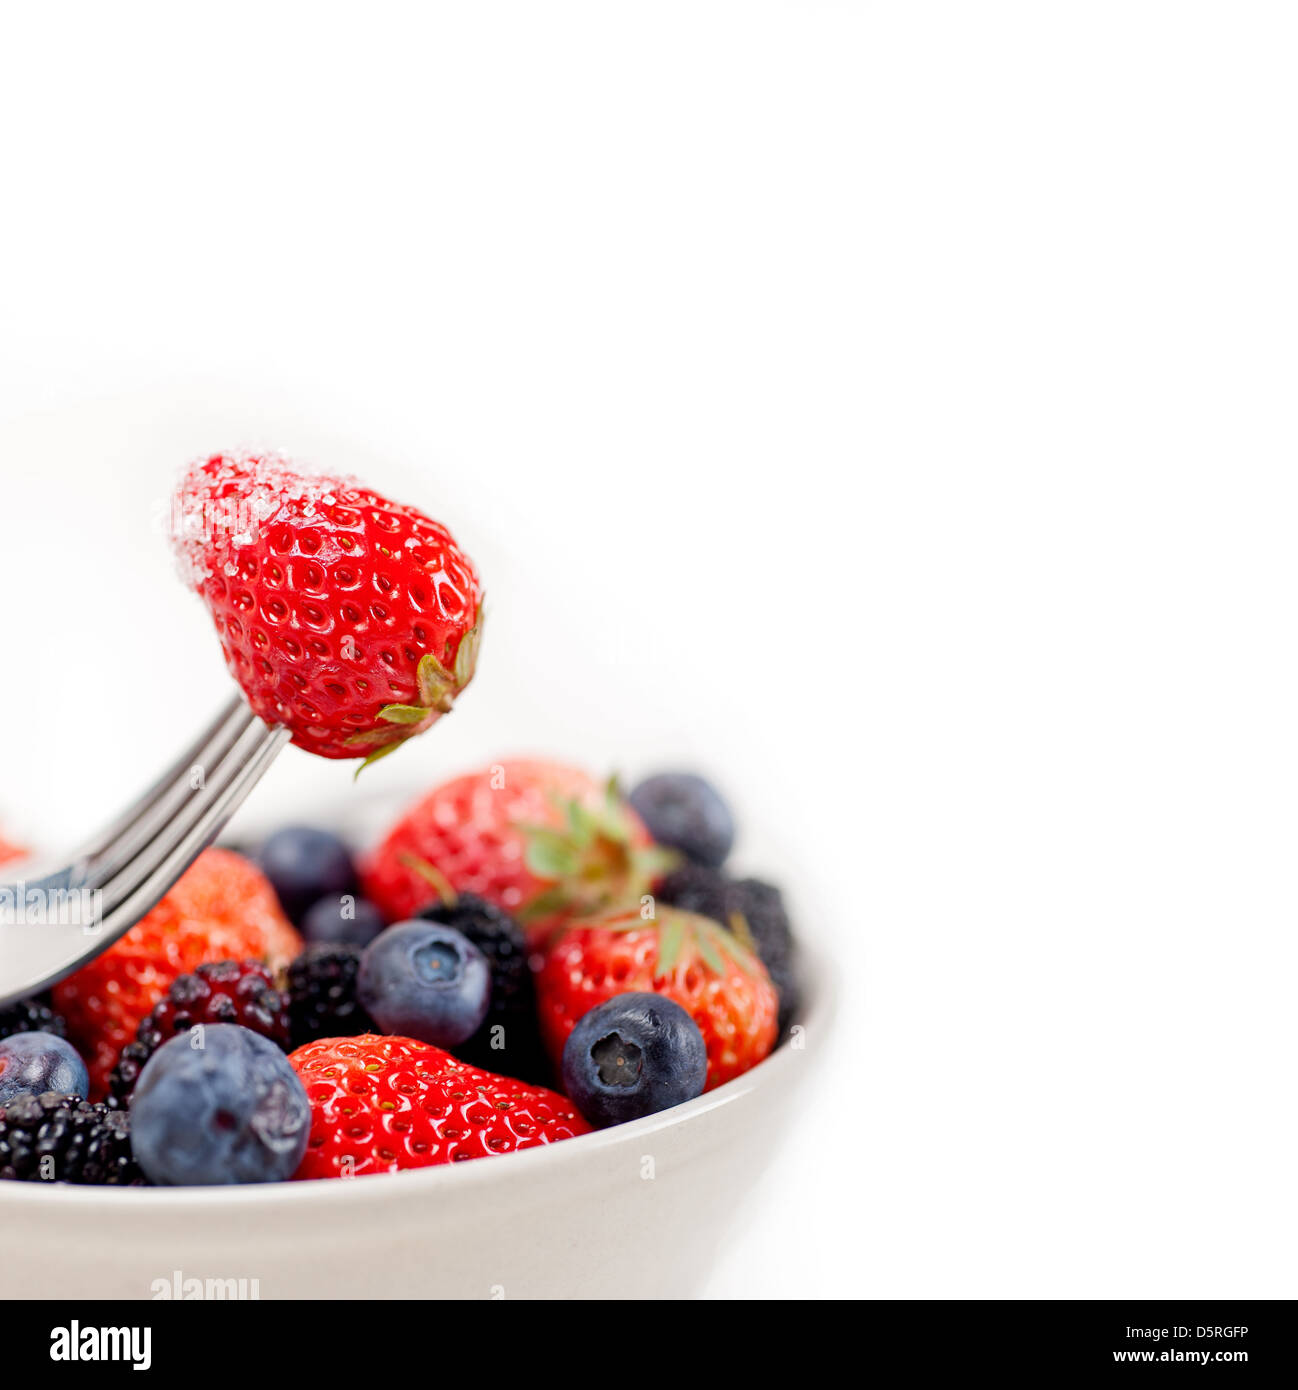 srawberry on a fork with sugar crust and bowl of mixed berries on white background Stock Photo